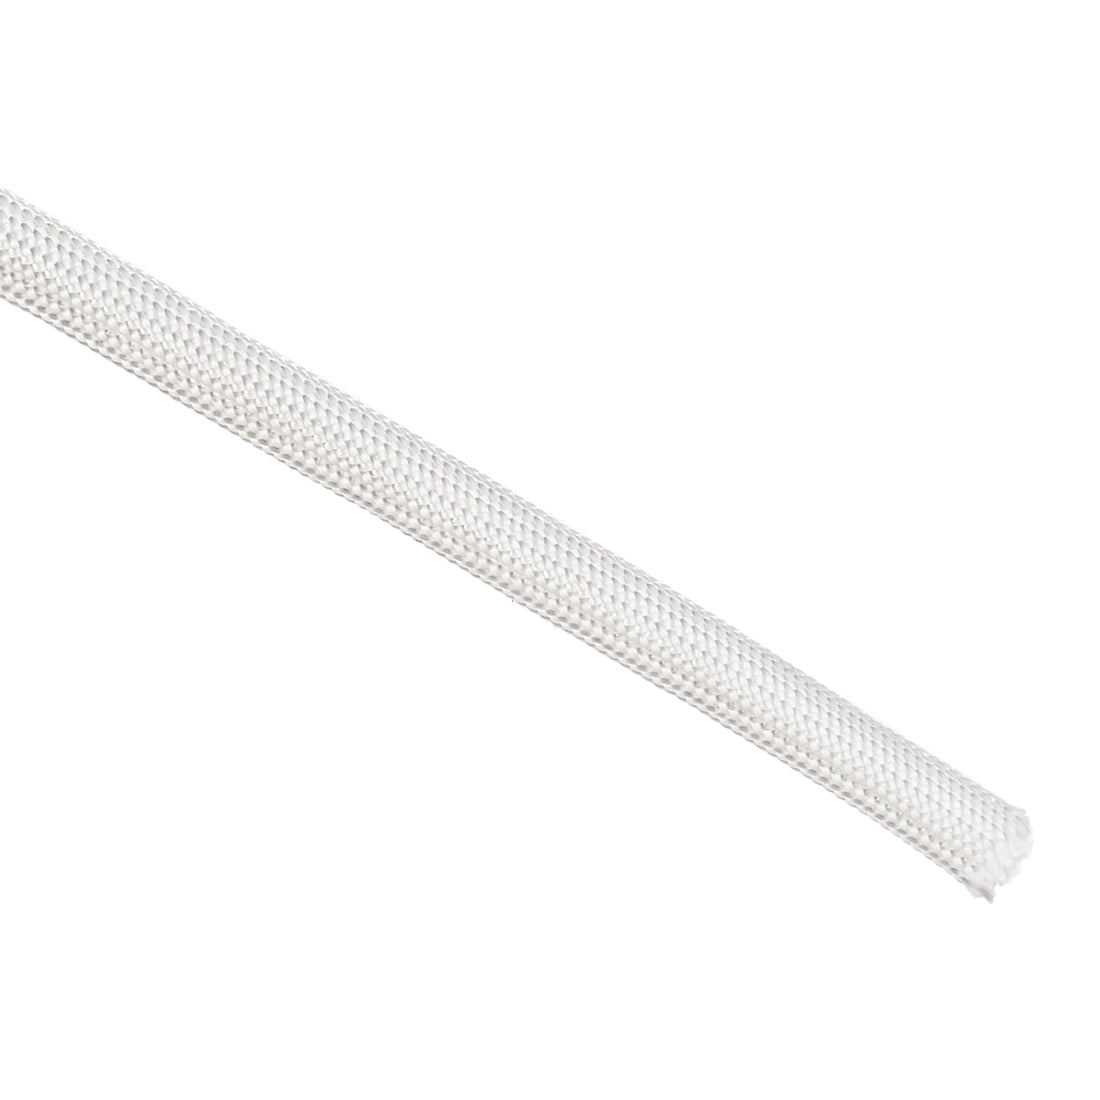 uxcell Uxcell Insulation Cable Protector, 9.8Ft-5mm High TEMP Fiberglass Sleeve White